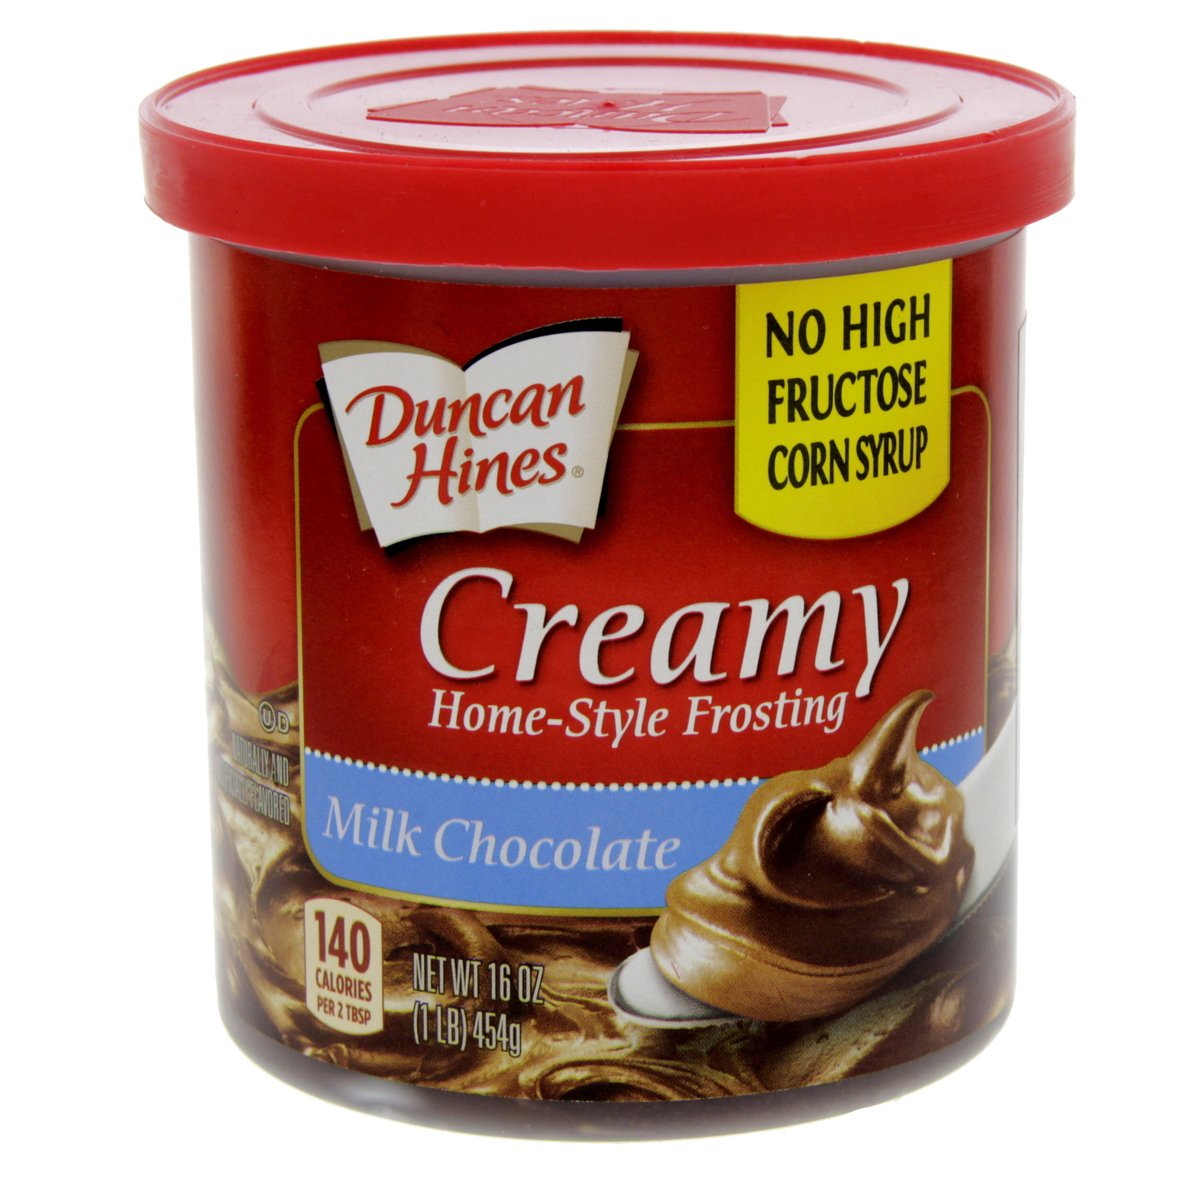 Duncan Hines Creamy Home-Style Frosting Milk Chocolate 454 g